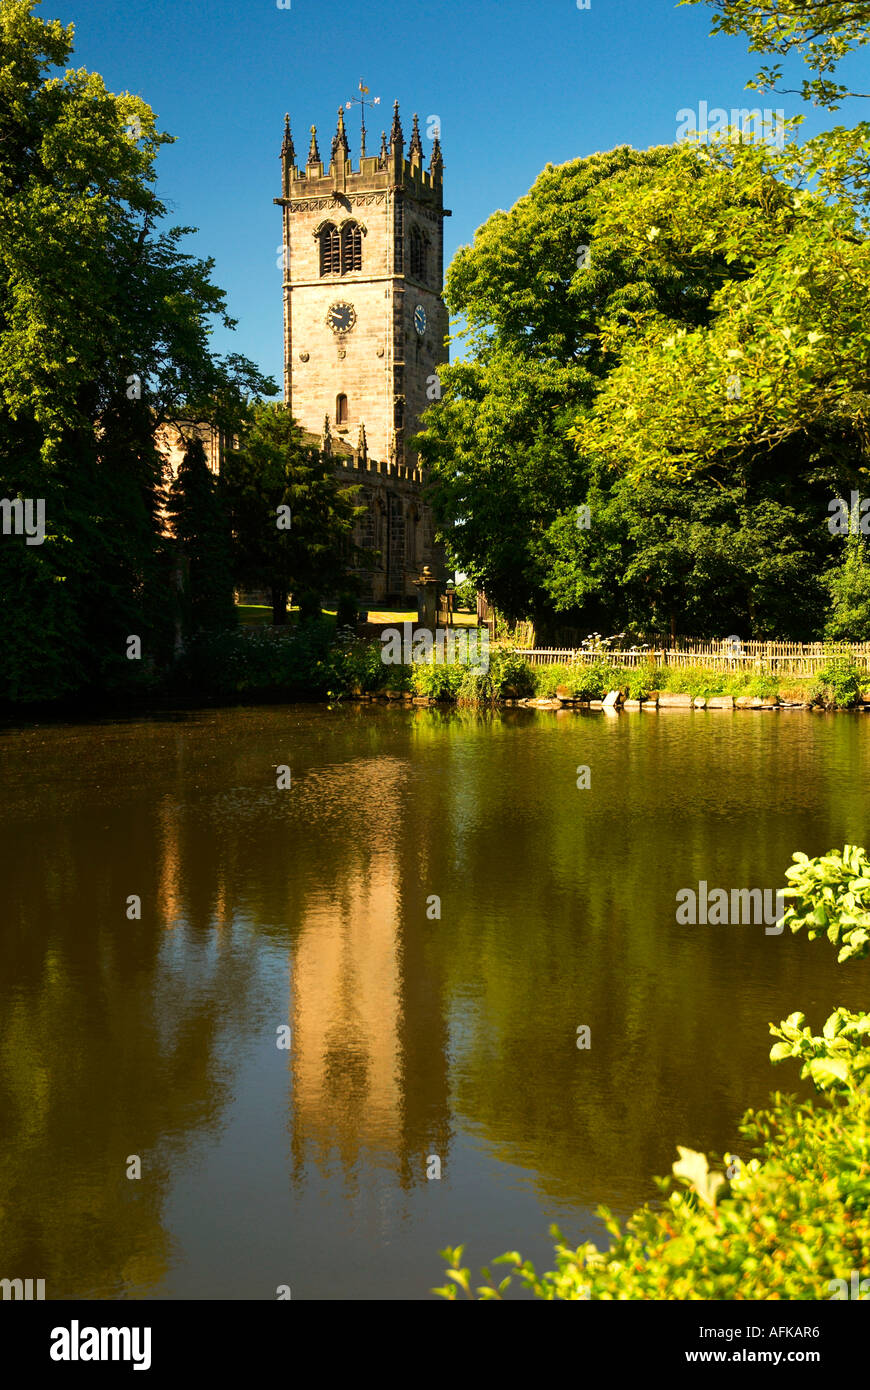 St James The Great Church Gawsworth Reflected in Pond Nr Macclesfield Cheshire UK Stock Photo